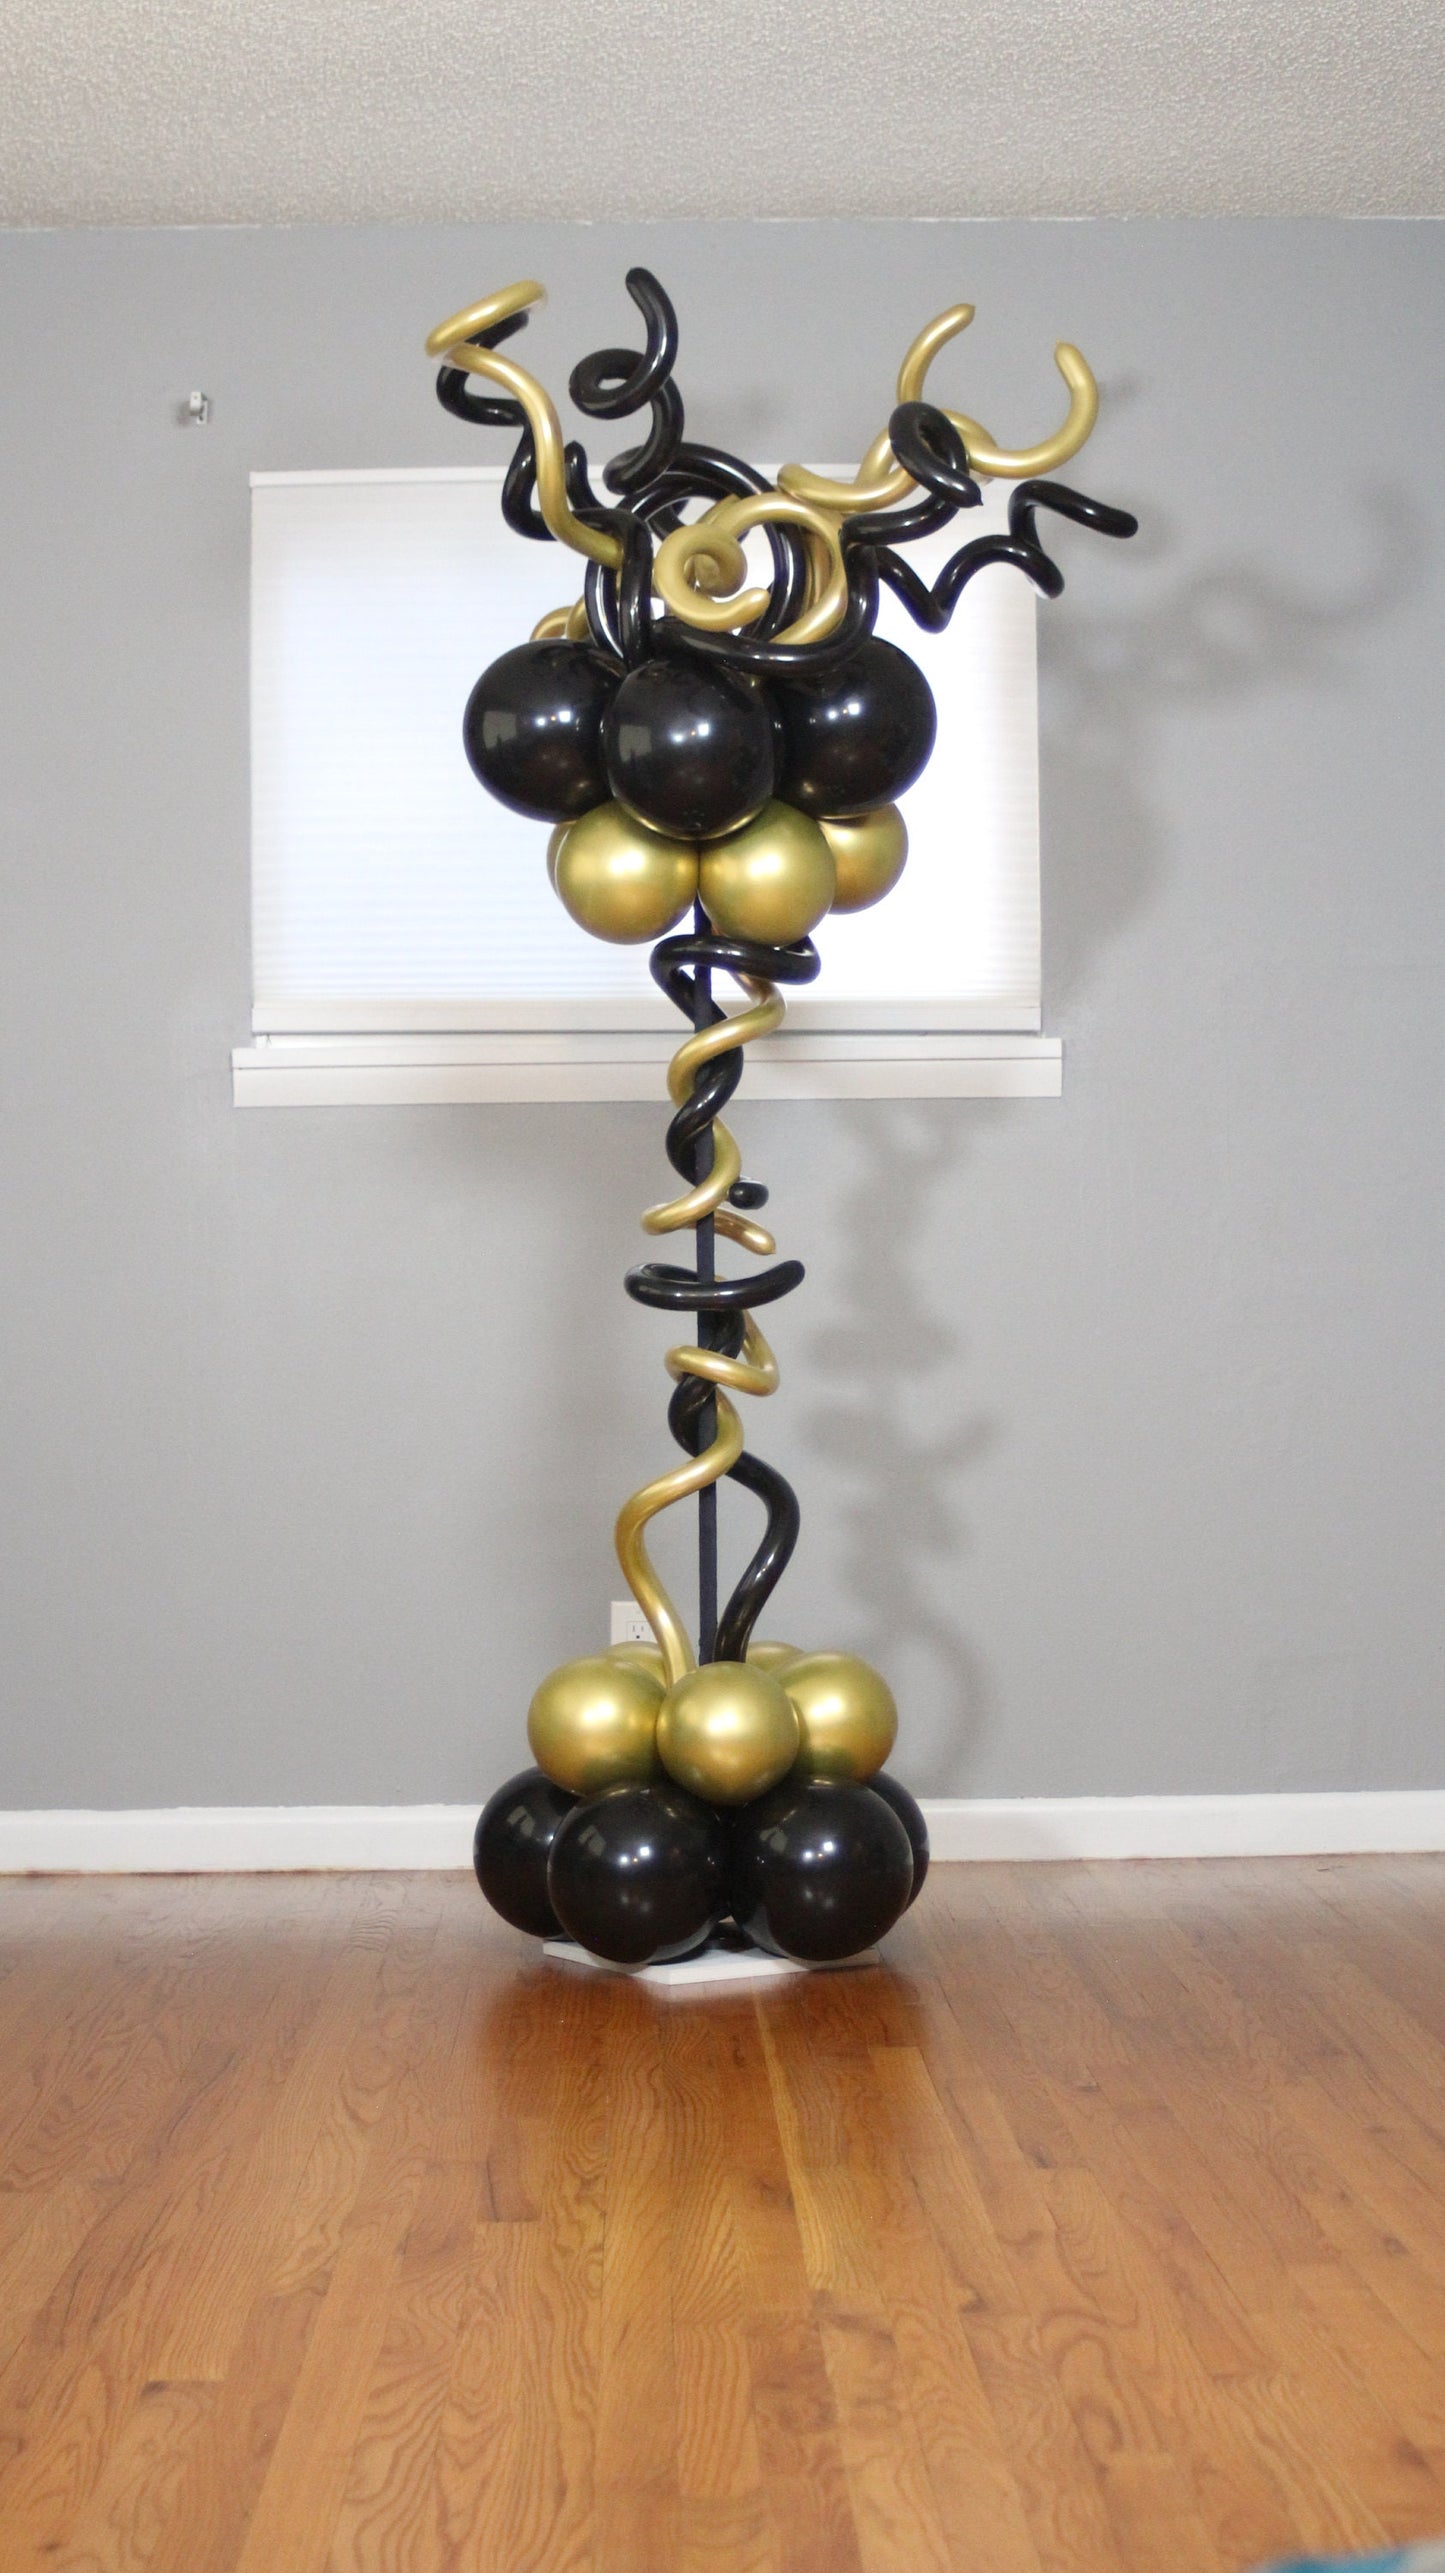 Balloon Stand Tutorial and Plans | Digital Plans for a Balloon Base